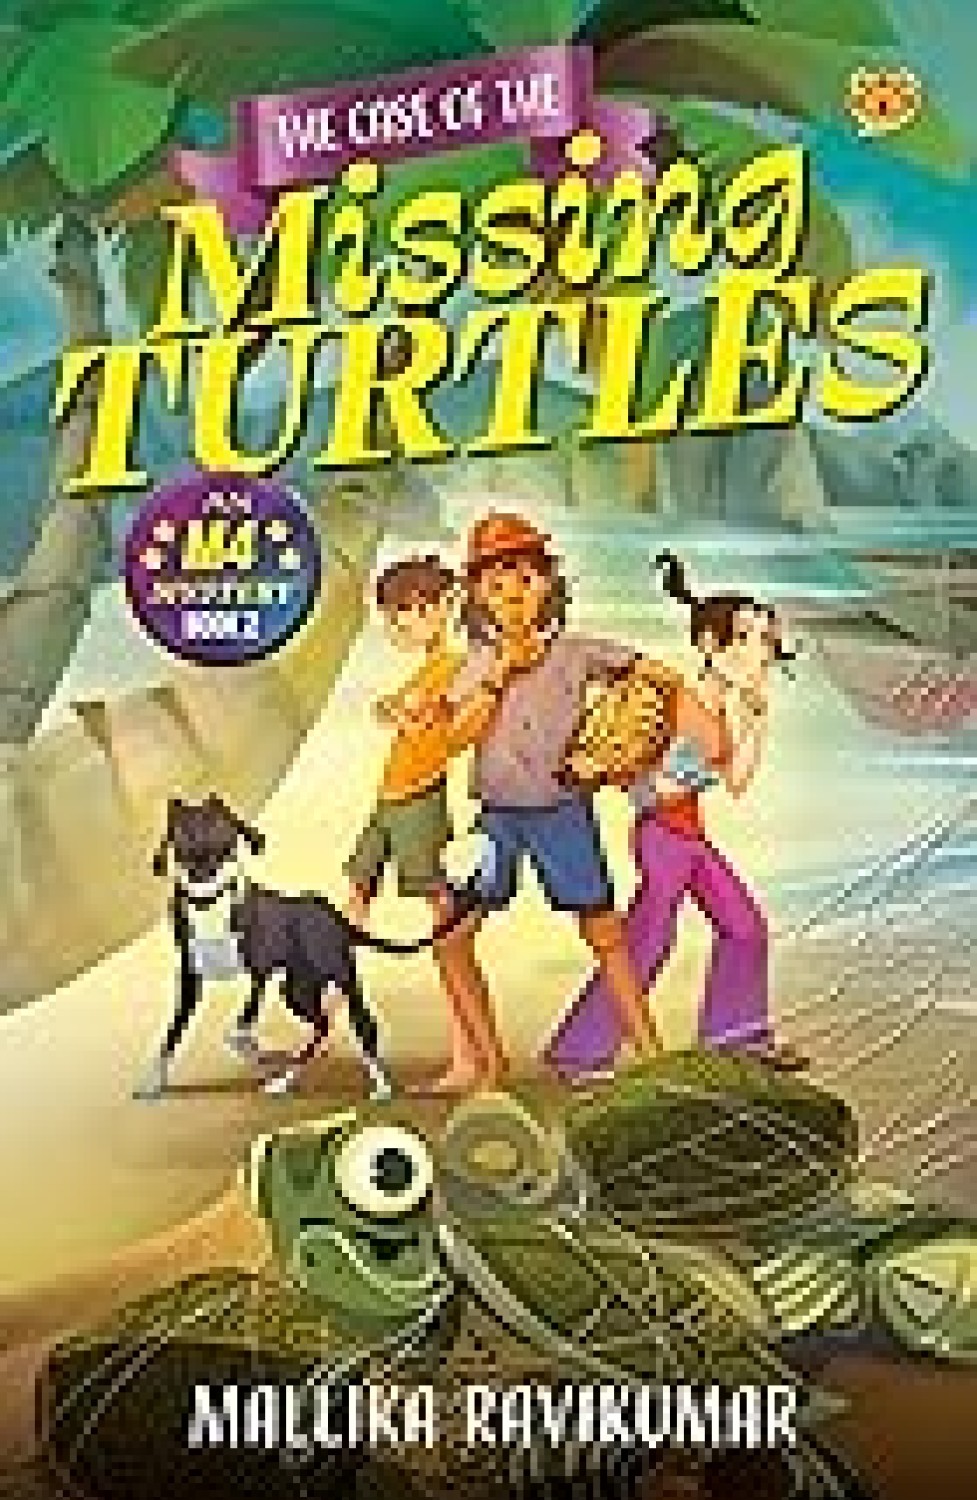 THE CASE OF THE MISSING TURTLES